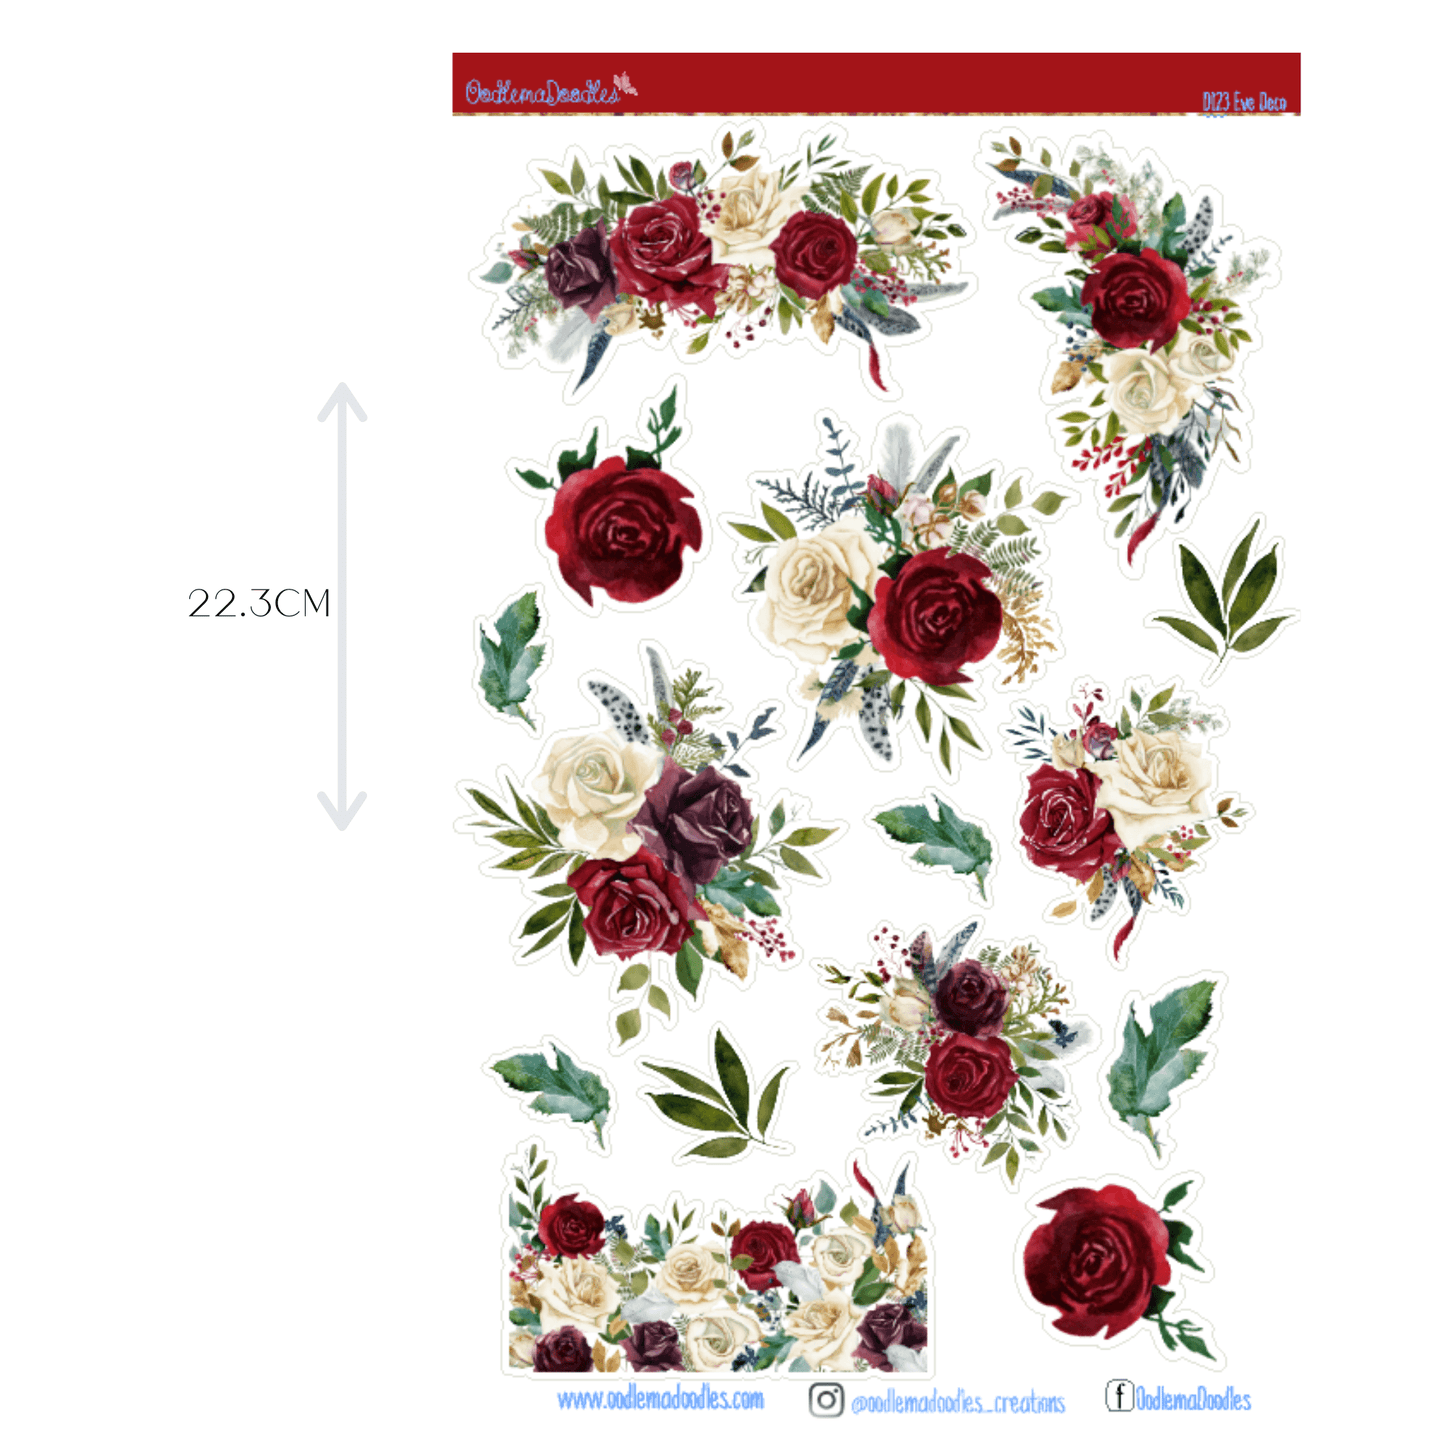 Eve Flower Large Decorative Planner Stickers